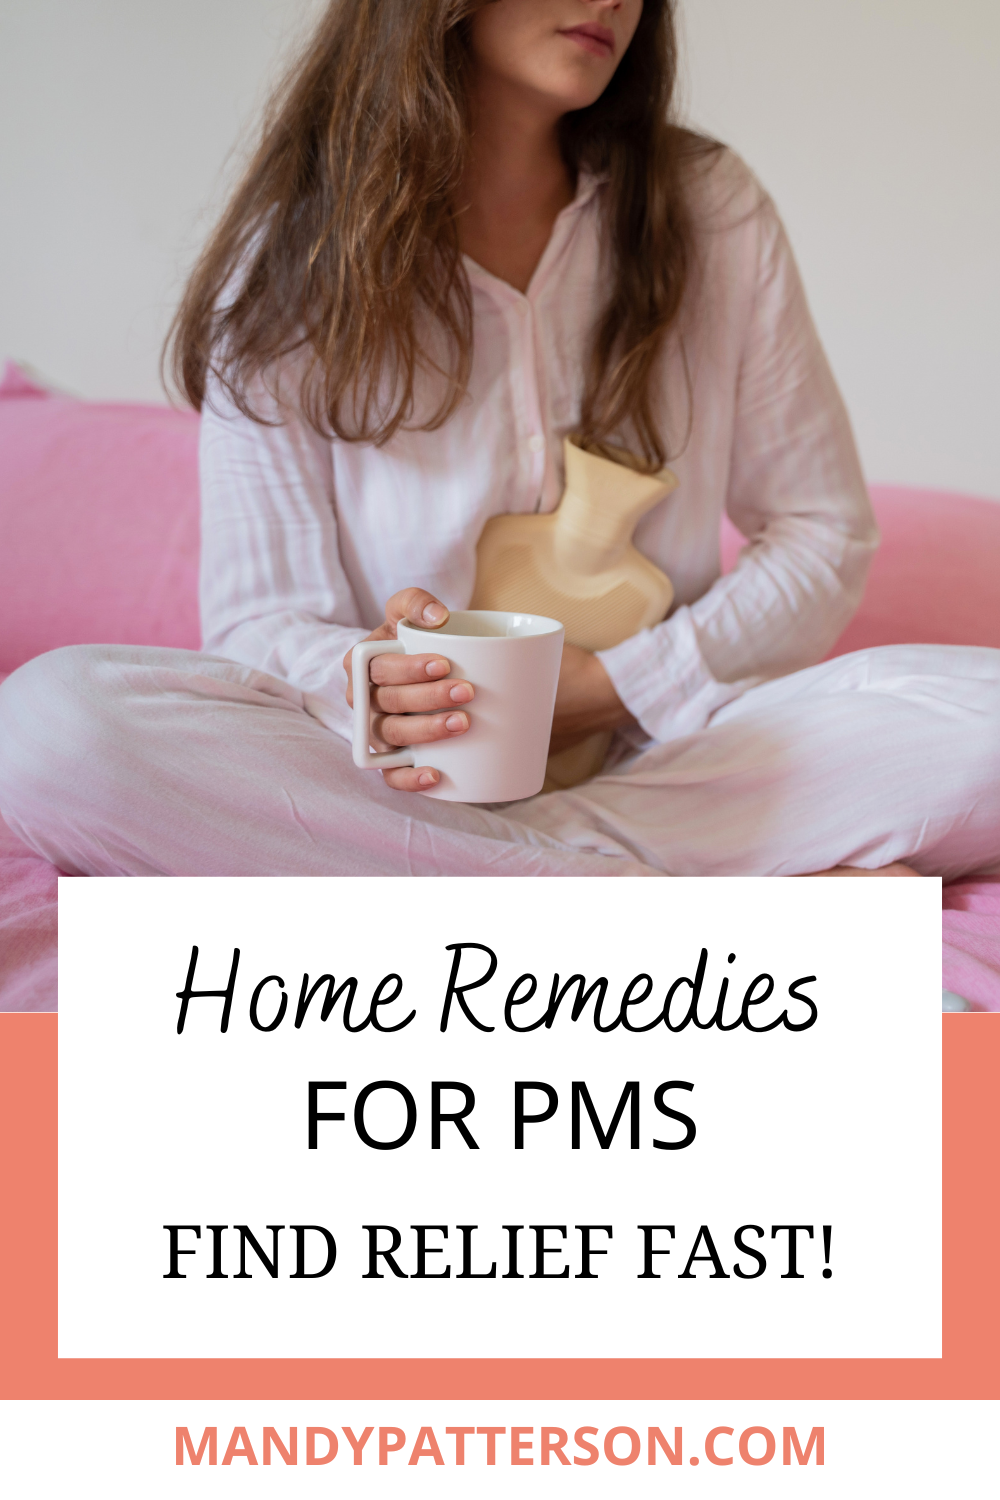 Home Remedies for PMS